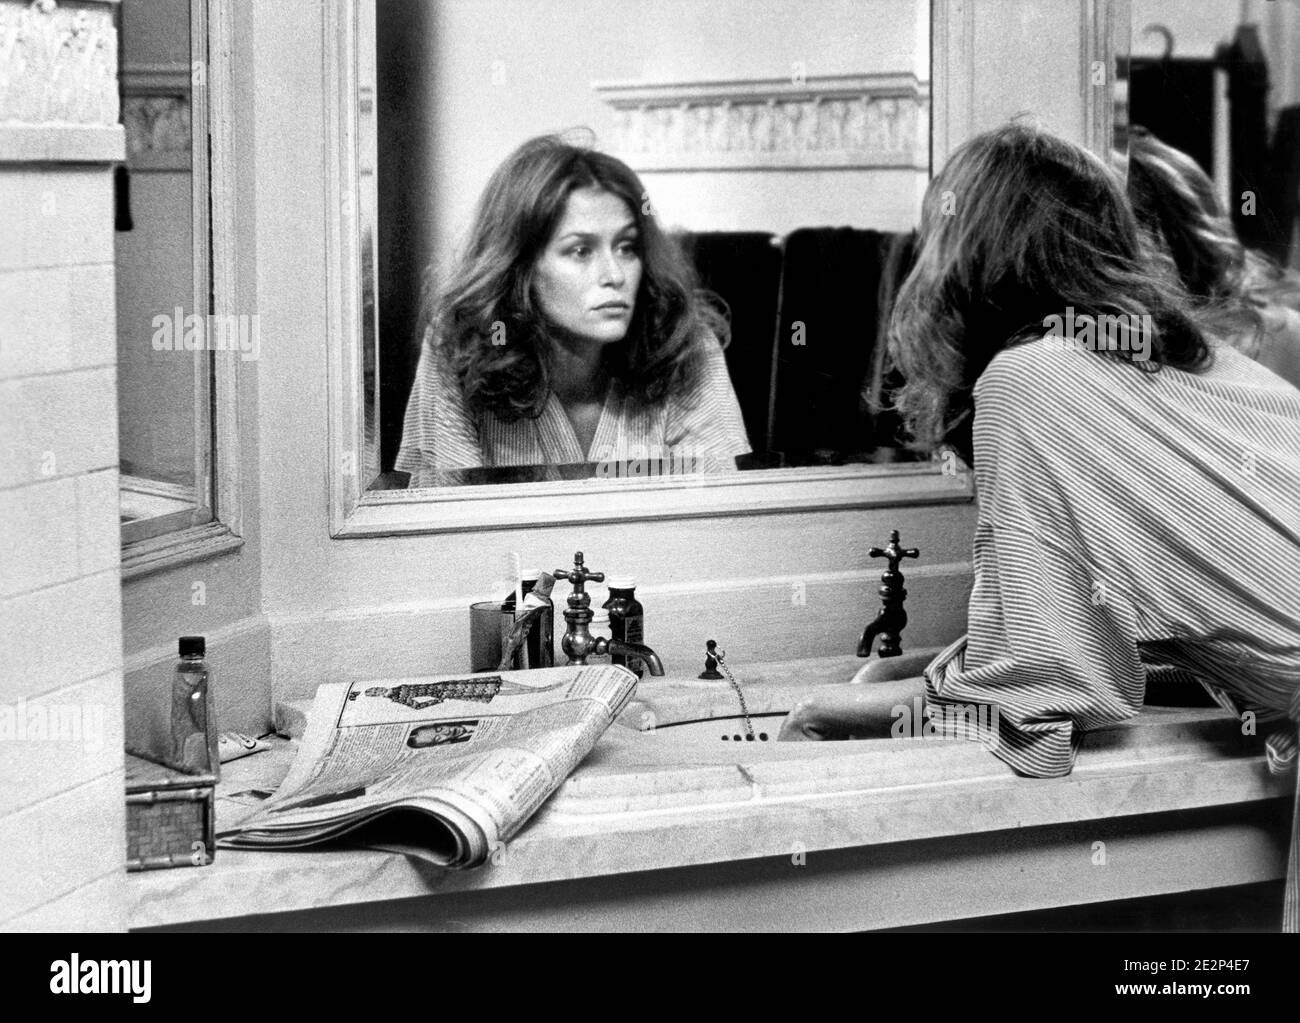 Lauren Hutton, on-set of the Film, 'The Gambler', Paramount Pictures, 1974 Stock Photo